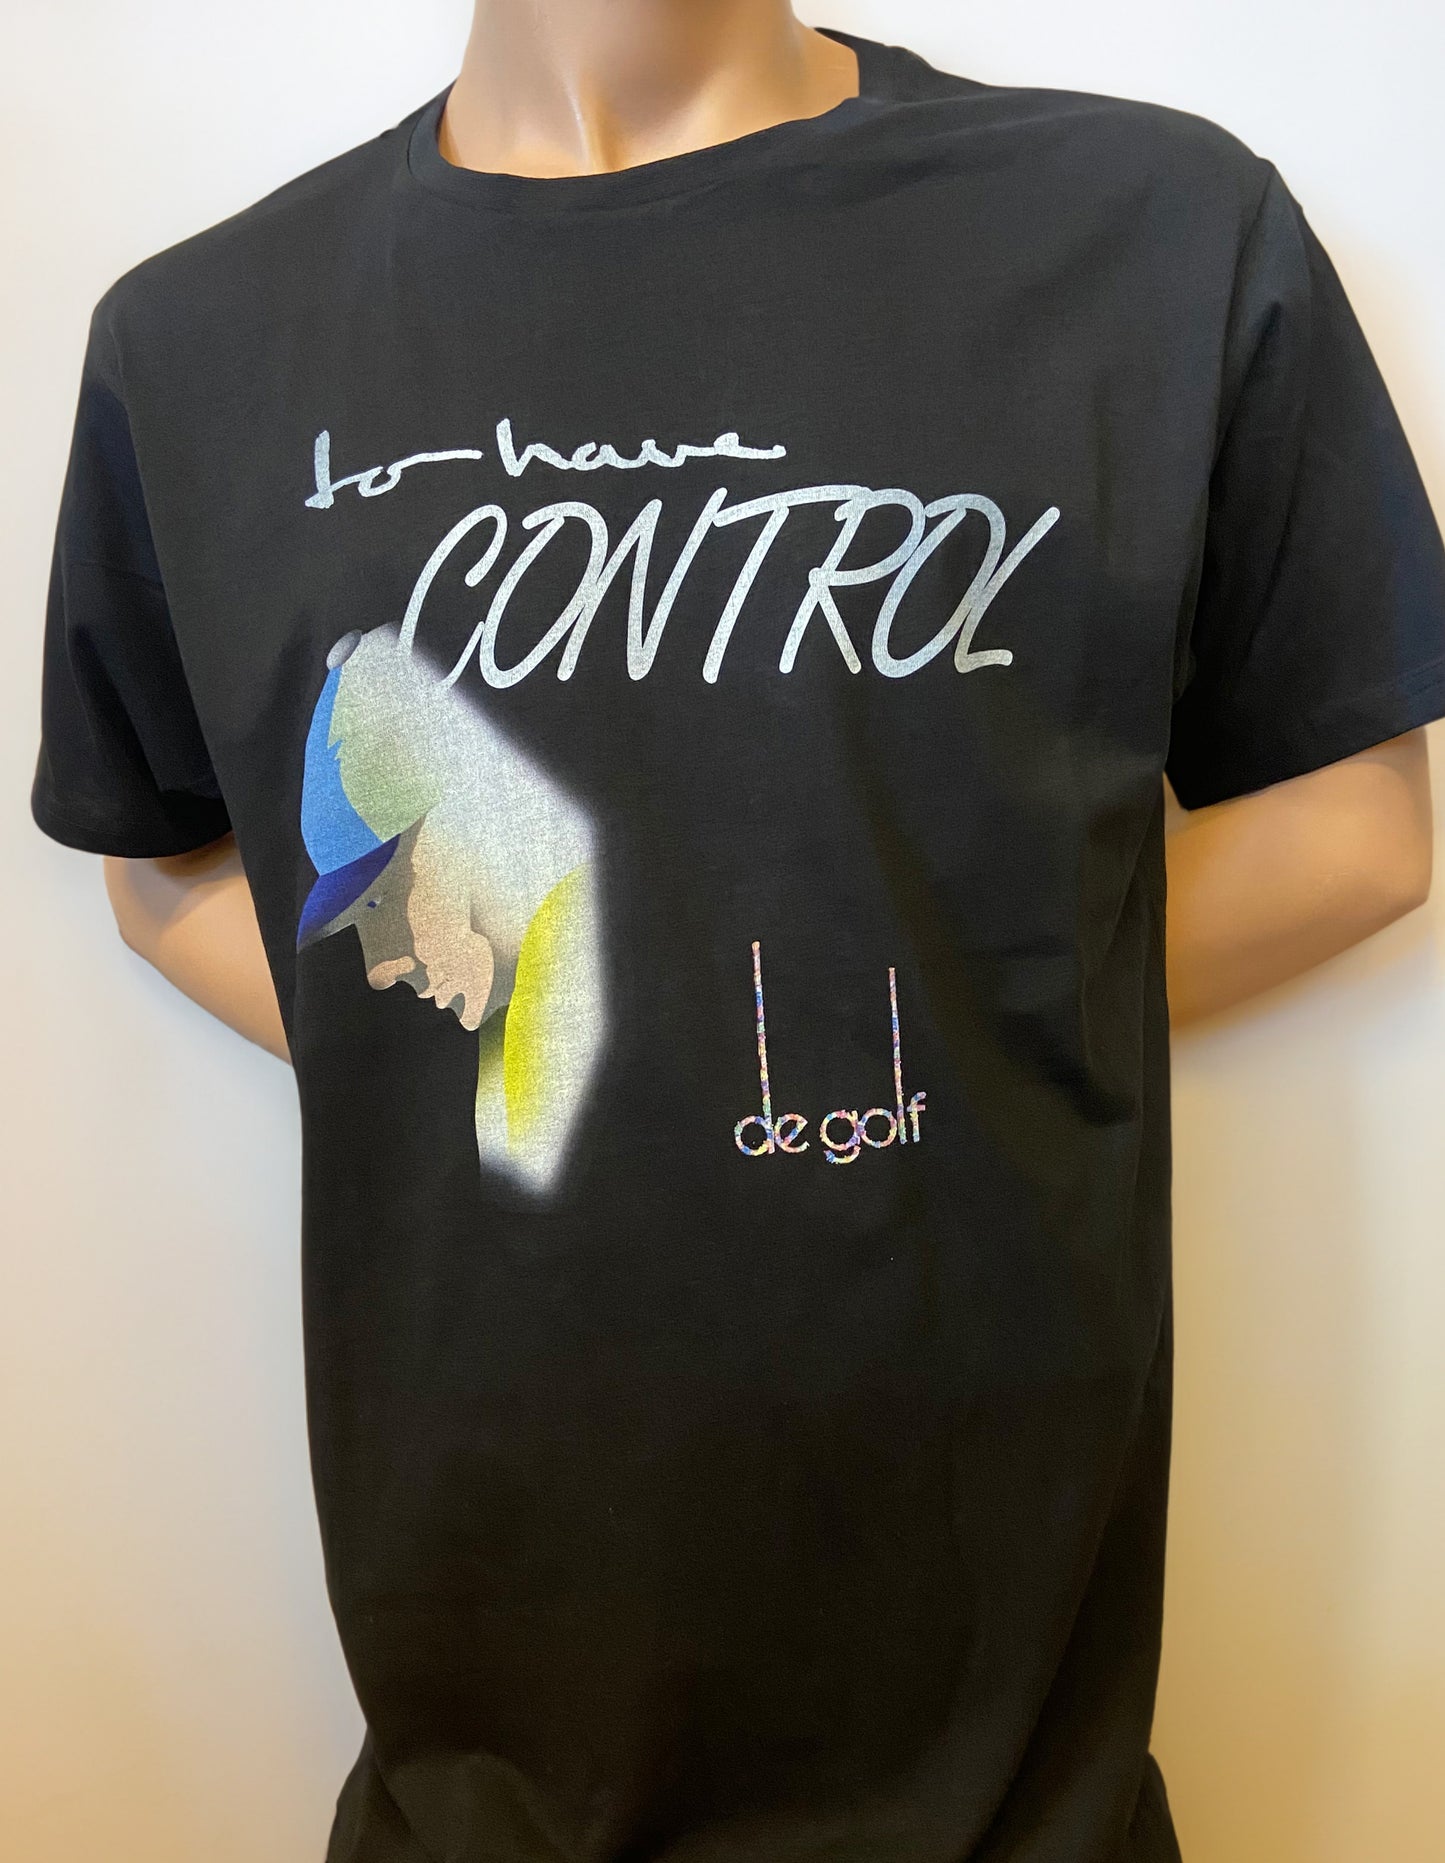 To have control - T - shirt